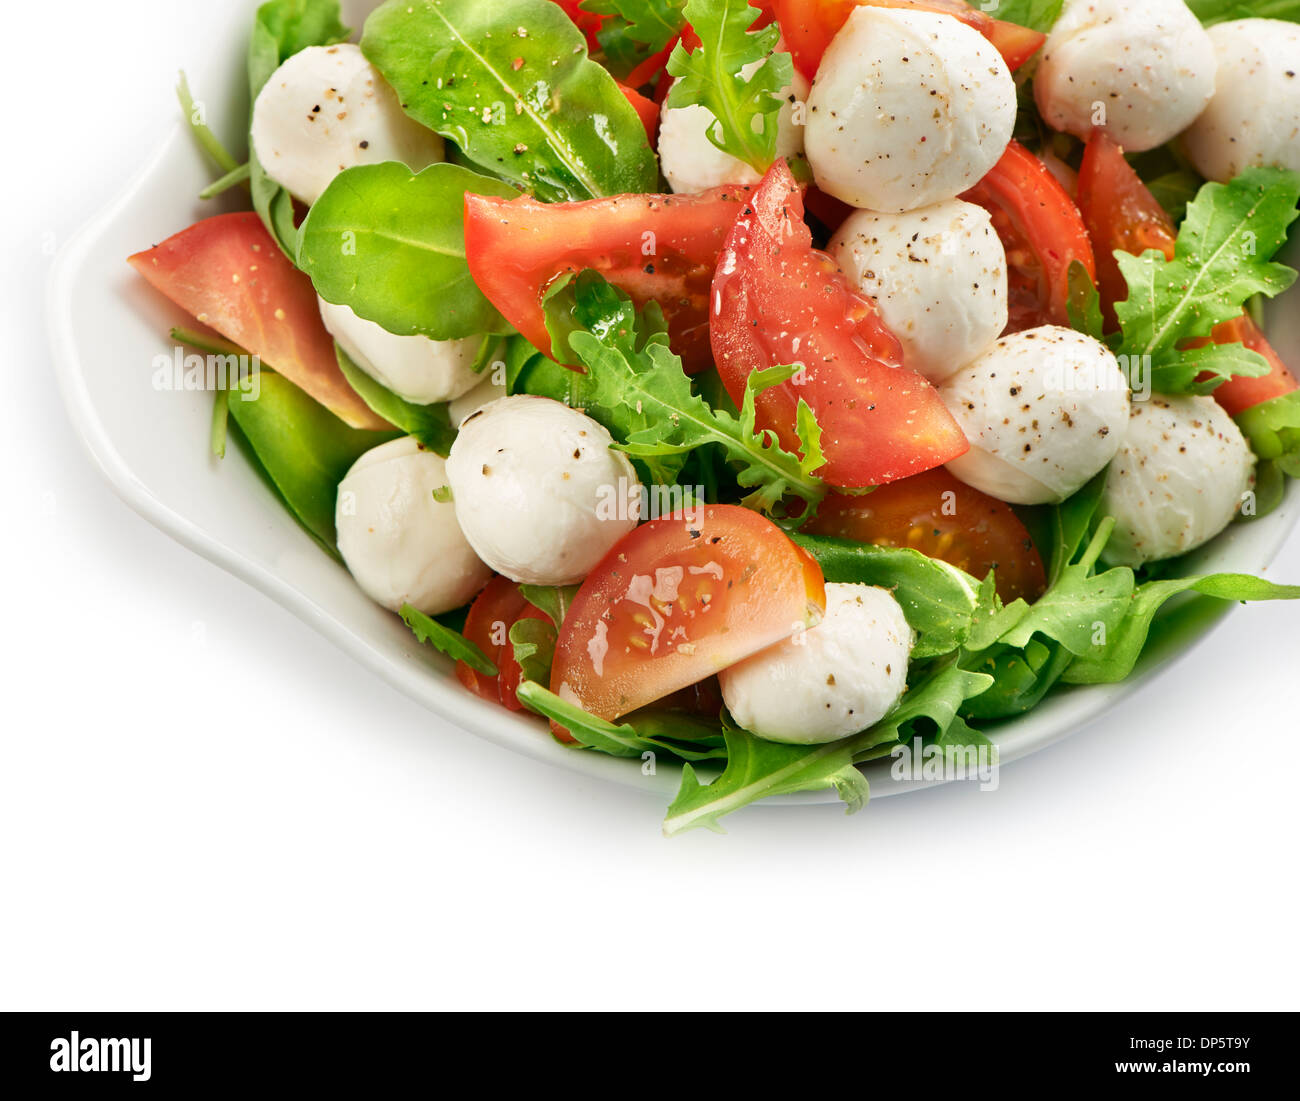 Fresh and healthy salad with tomato mozzarella and lettuce served in a white bowl with a soft shadow Stock Photo